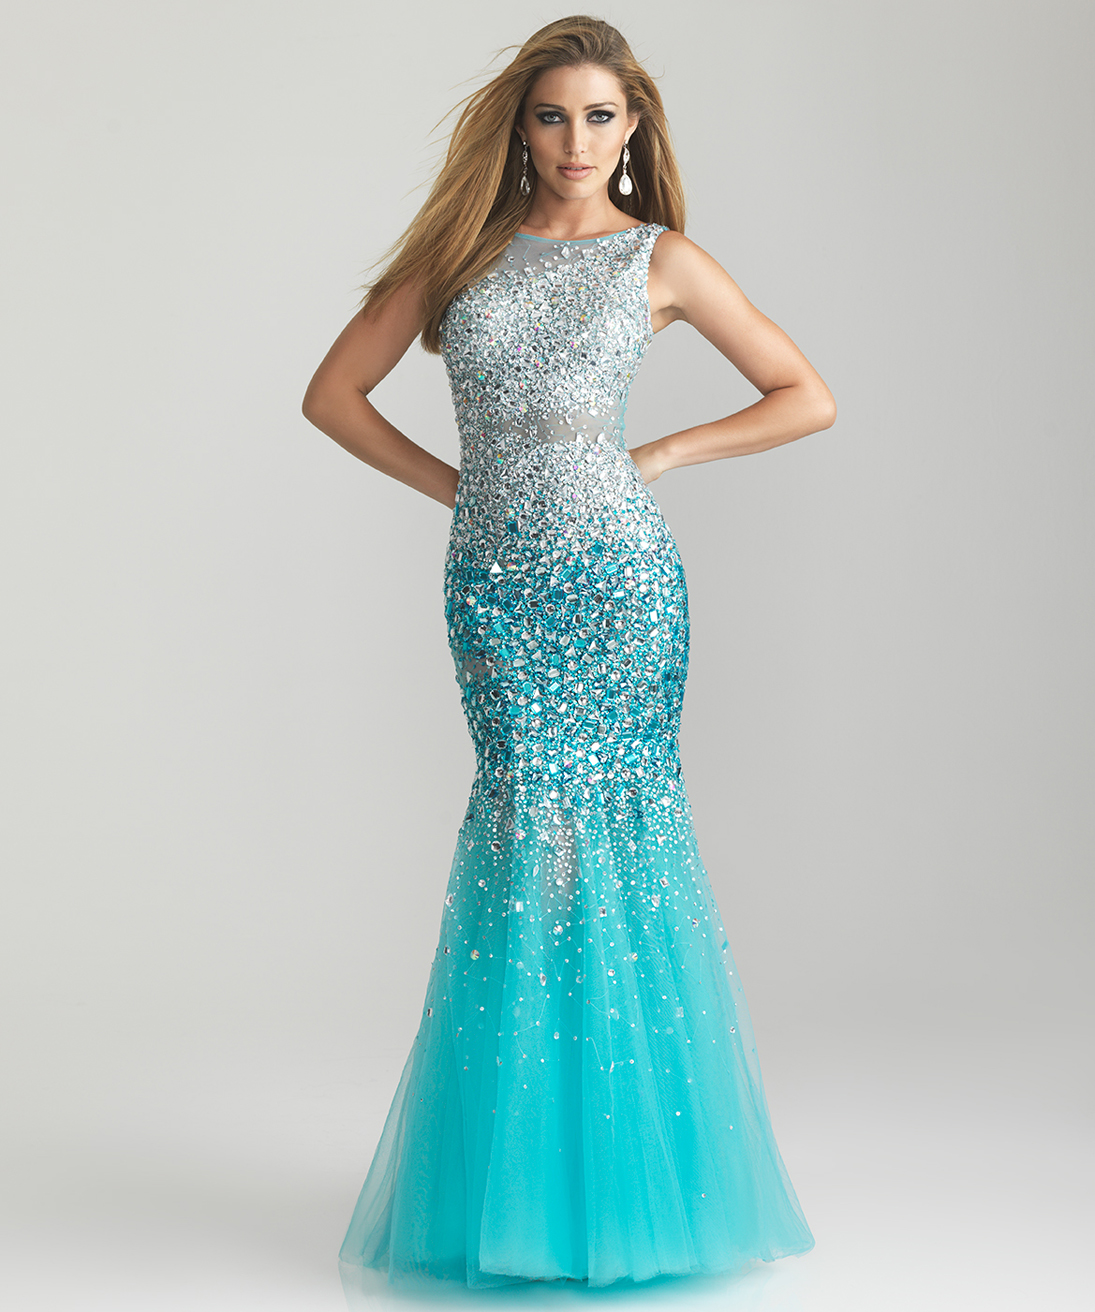 Stunning Prom Dresses And Wedding Dresses For You Quick Tips For Finding 2017 Mermaid Prom 